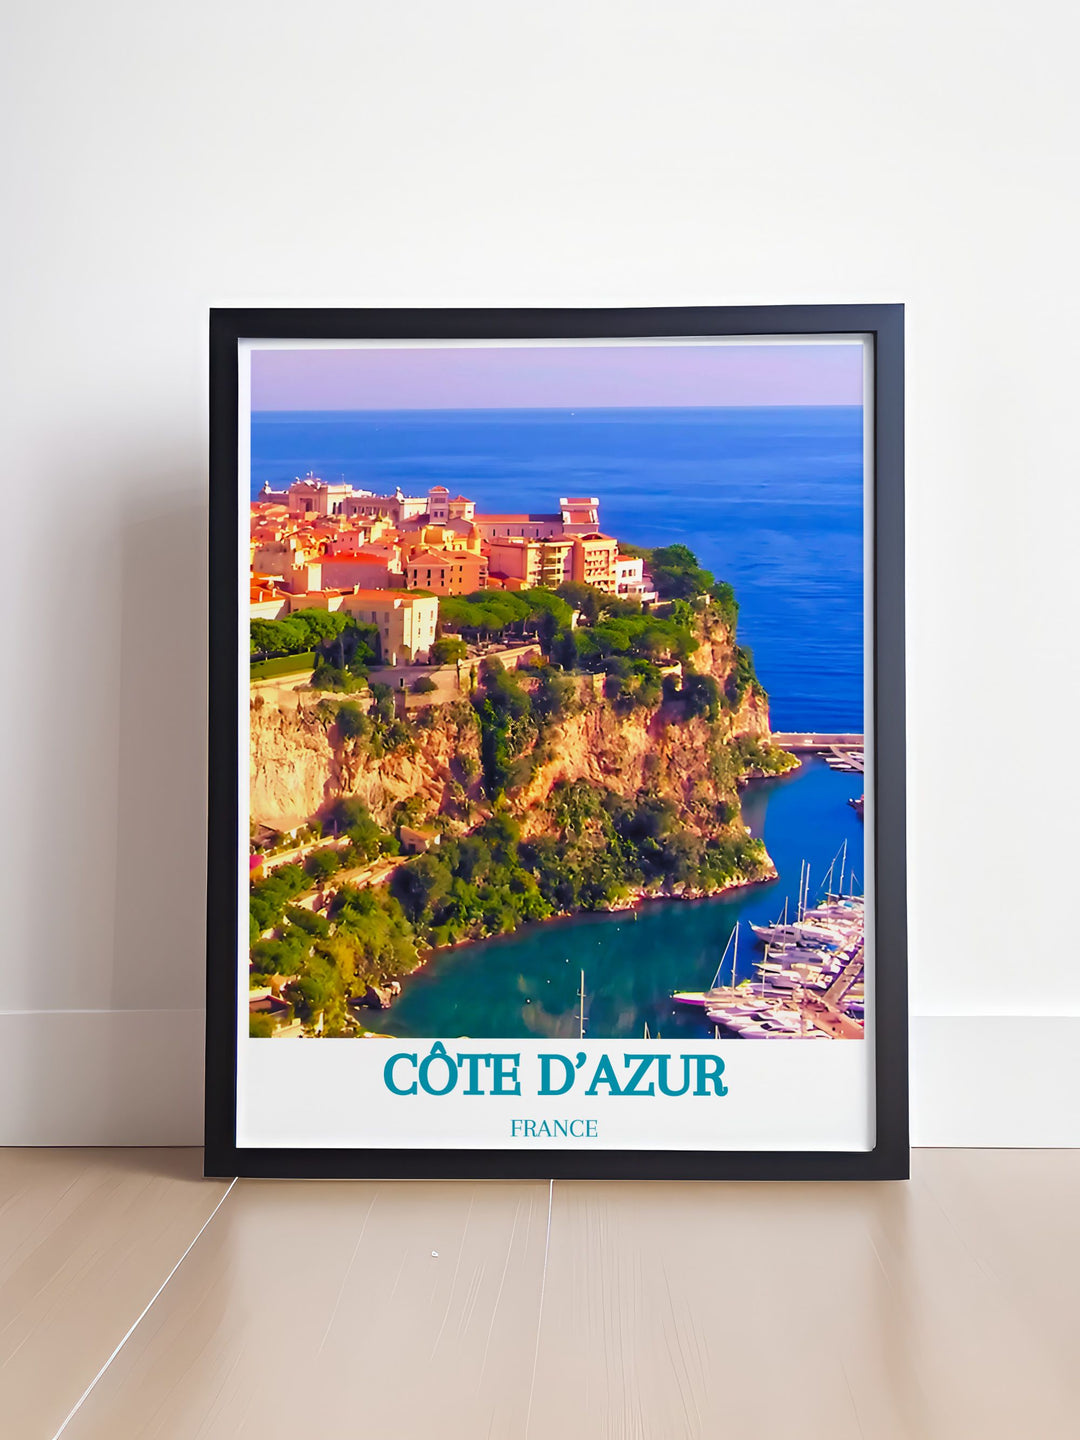 Home decor print showcasing the enchanting Côte dAzur, with its picturesque coastal scenery and the iconic Le Rocher. This artwork brings the beauty of the French Riviera into your space, featuring vibrant colors and intricate details of the Mediterranean landscape.